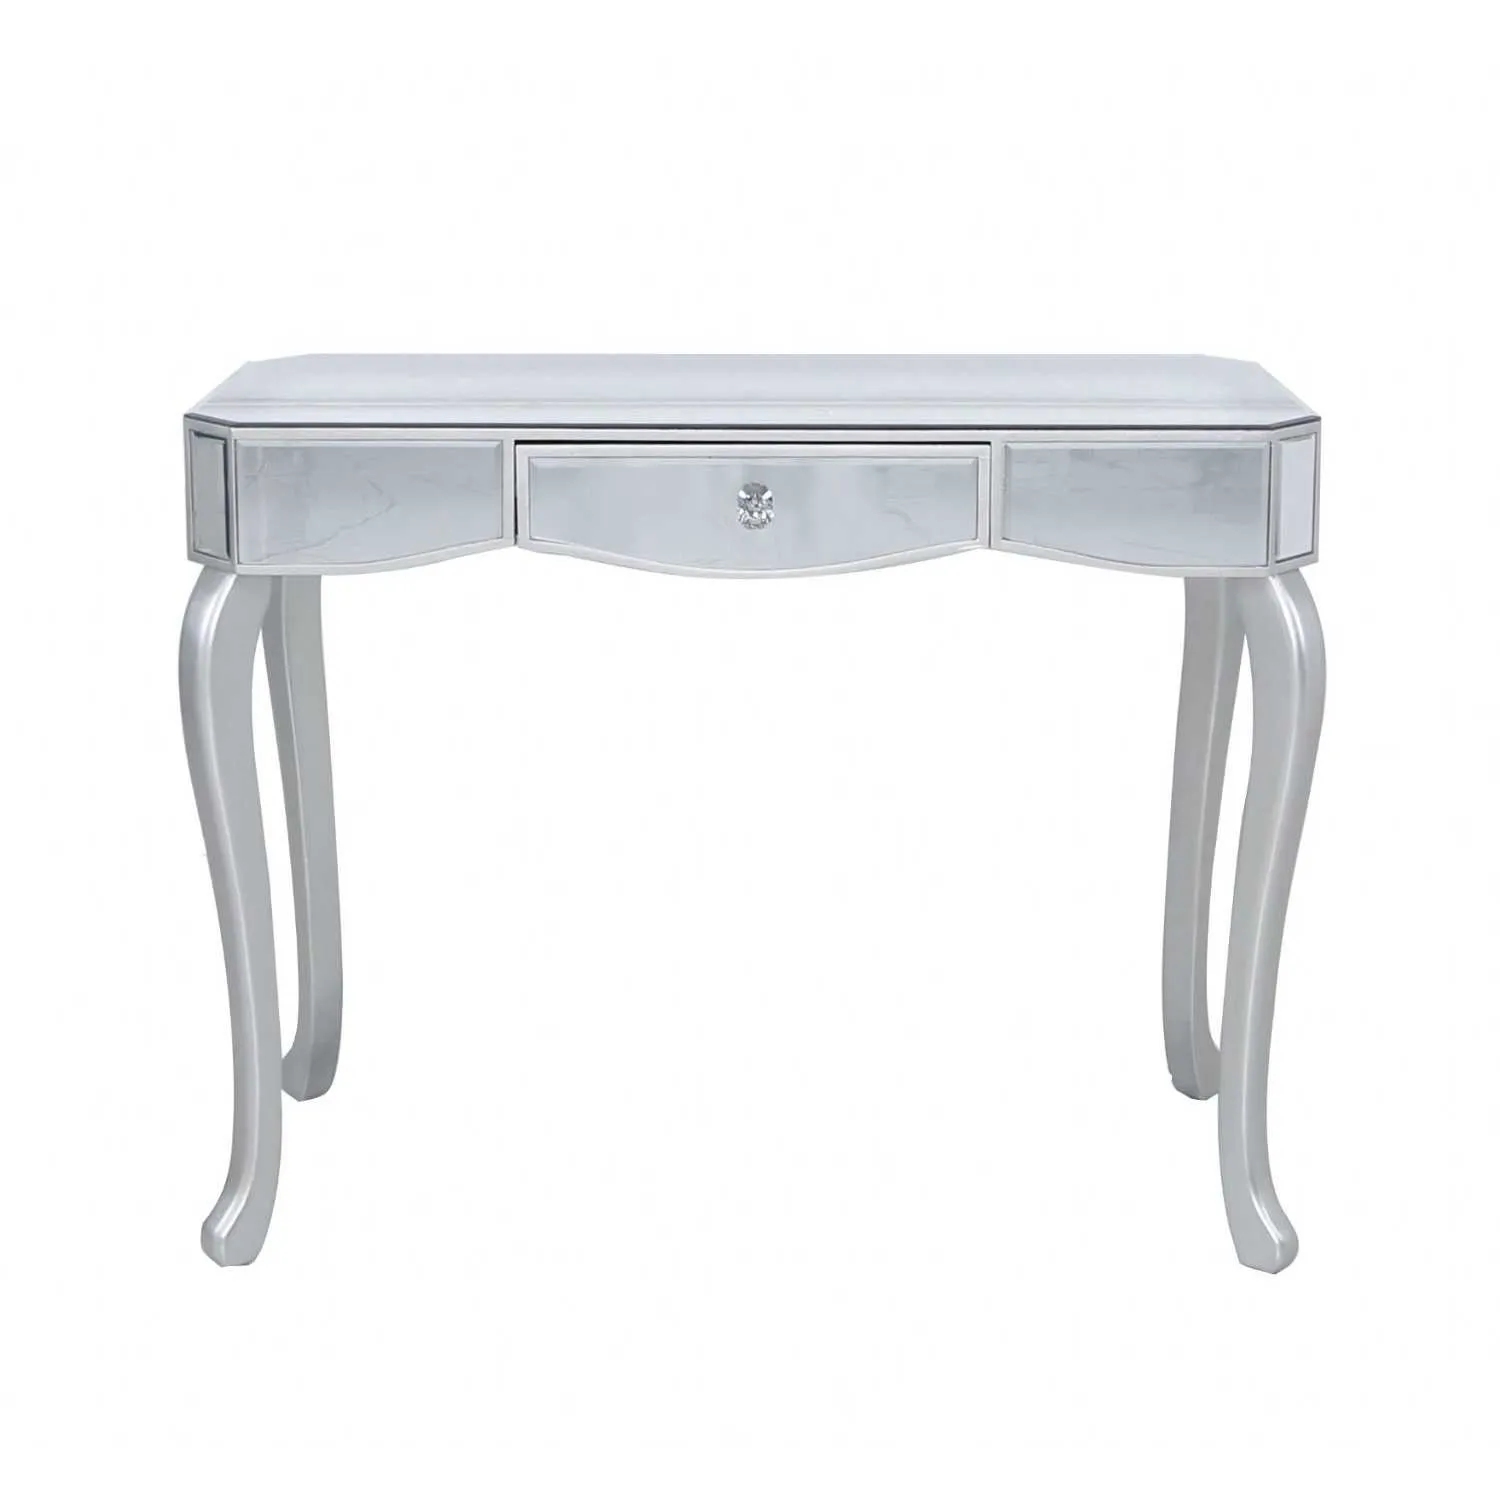 1 Drawer Mirror Console Table Silver Trim